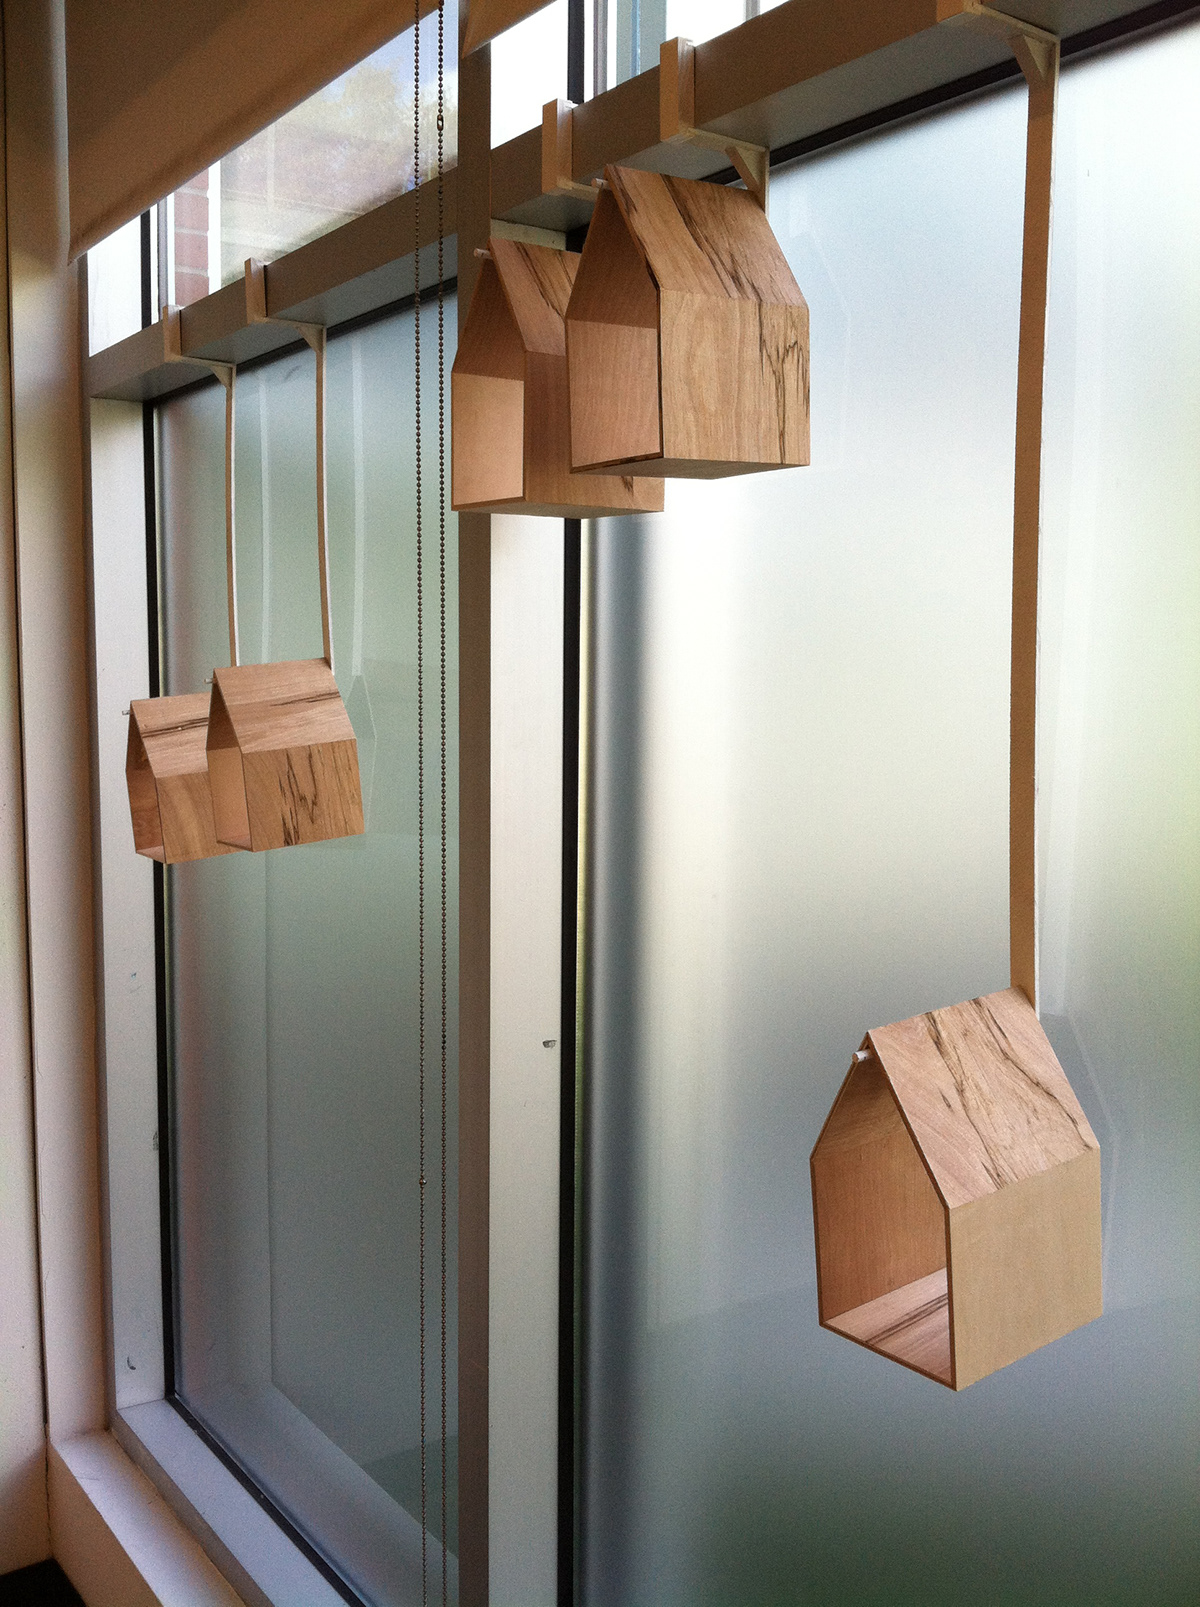 houses installation sculpture light Joinery Window woodworking